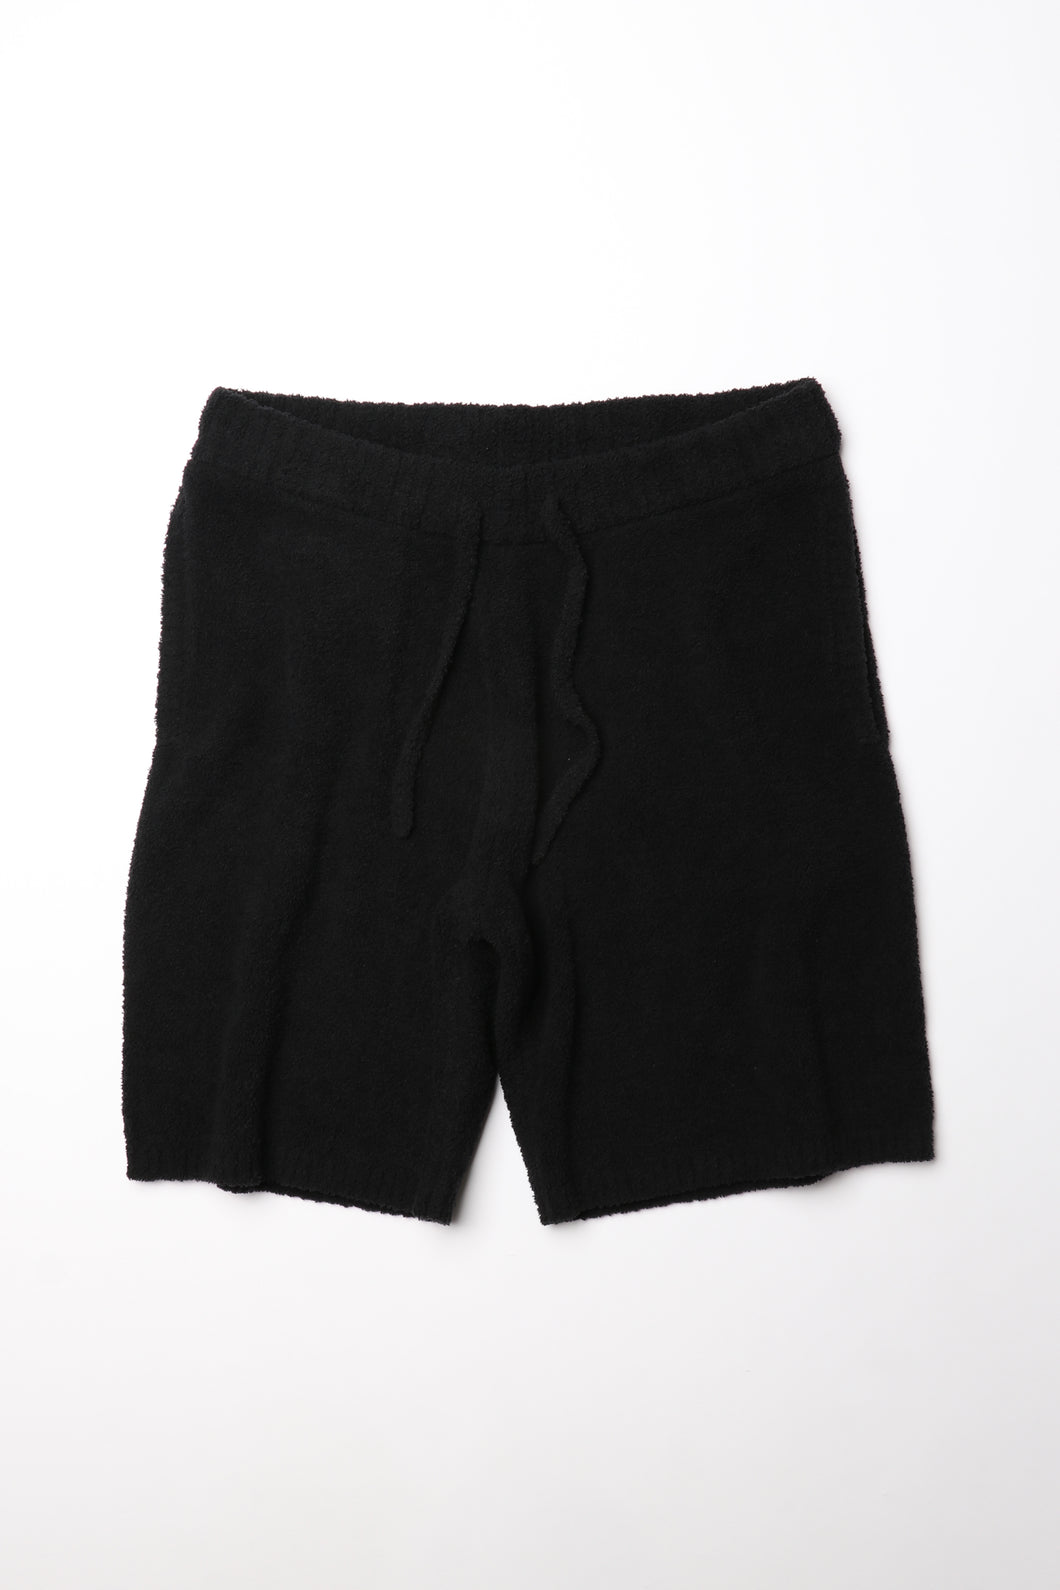 【MEN】nestwell YEW < Relaxed Fit Short Pants >